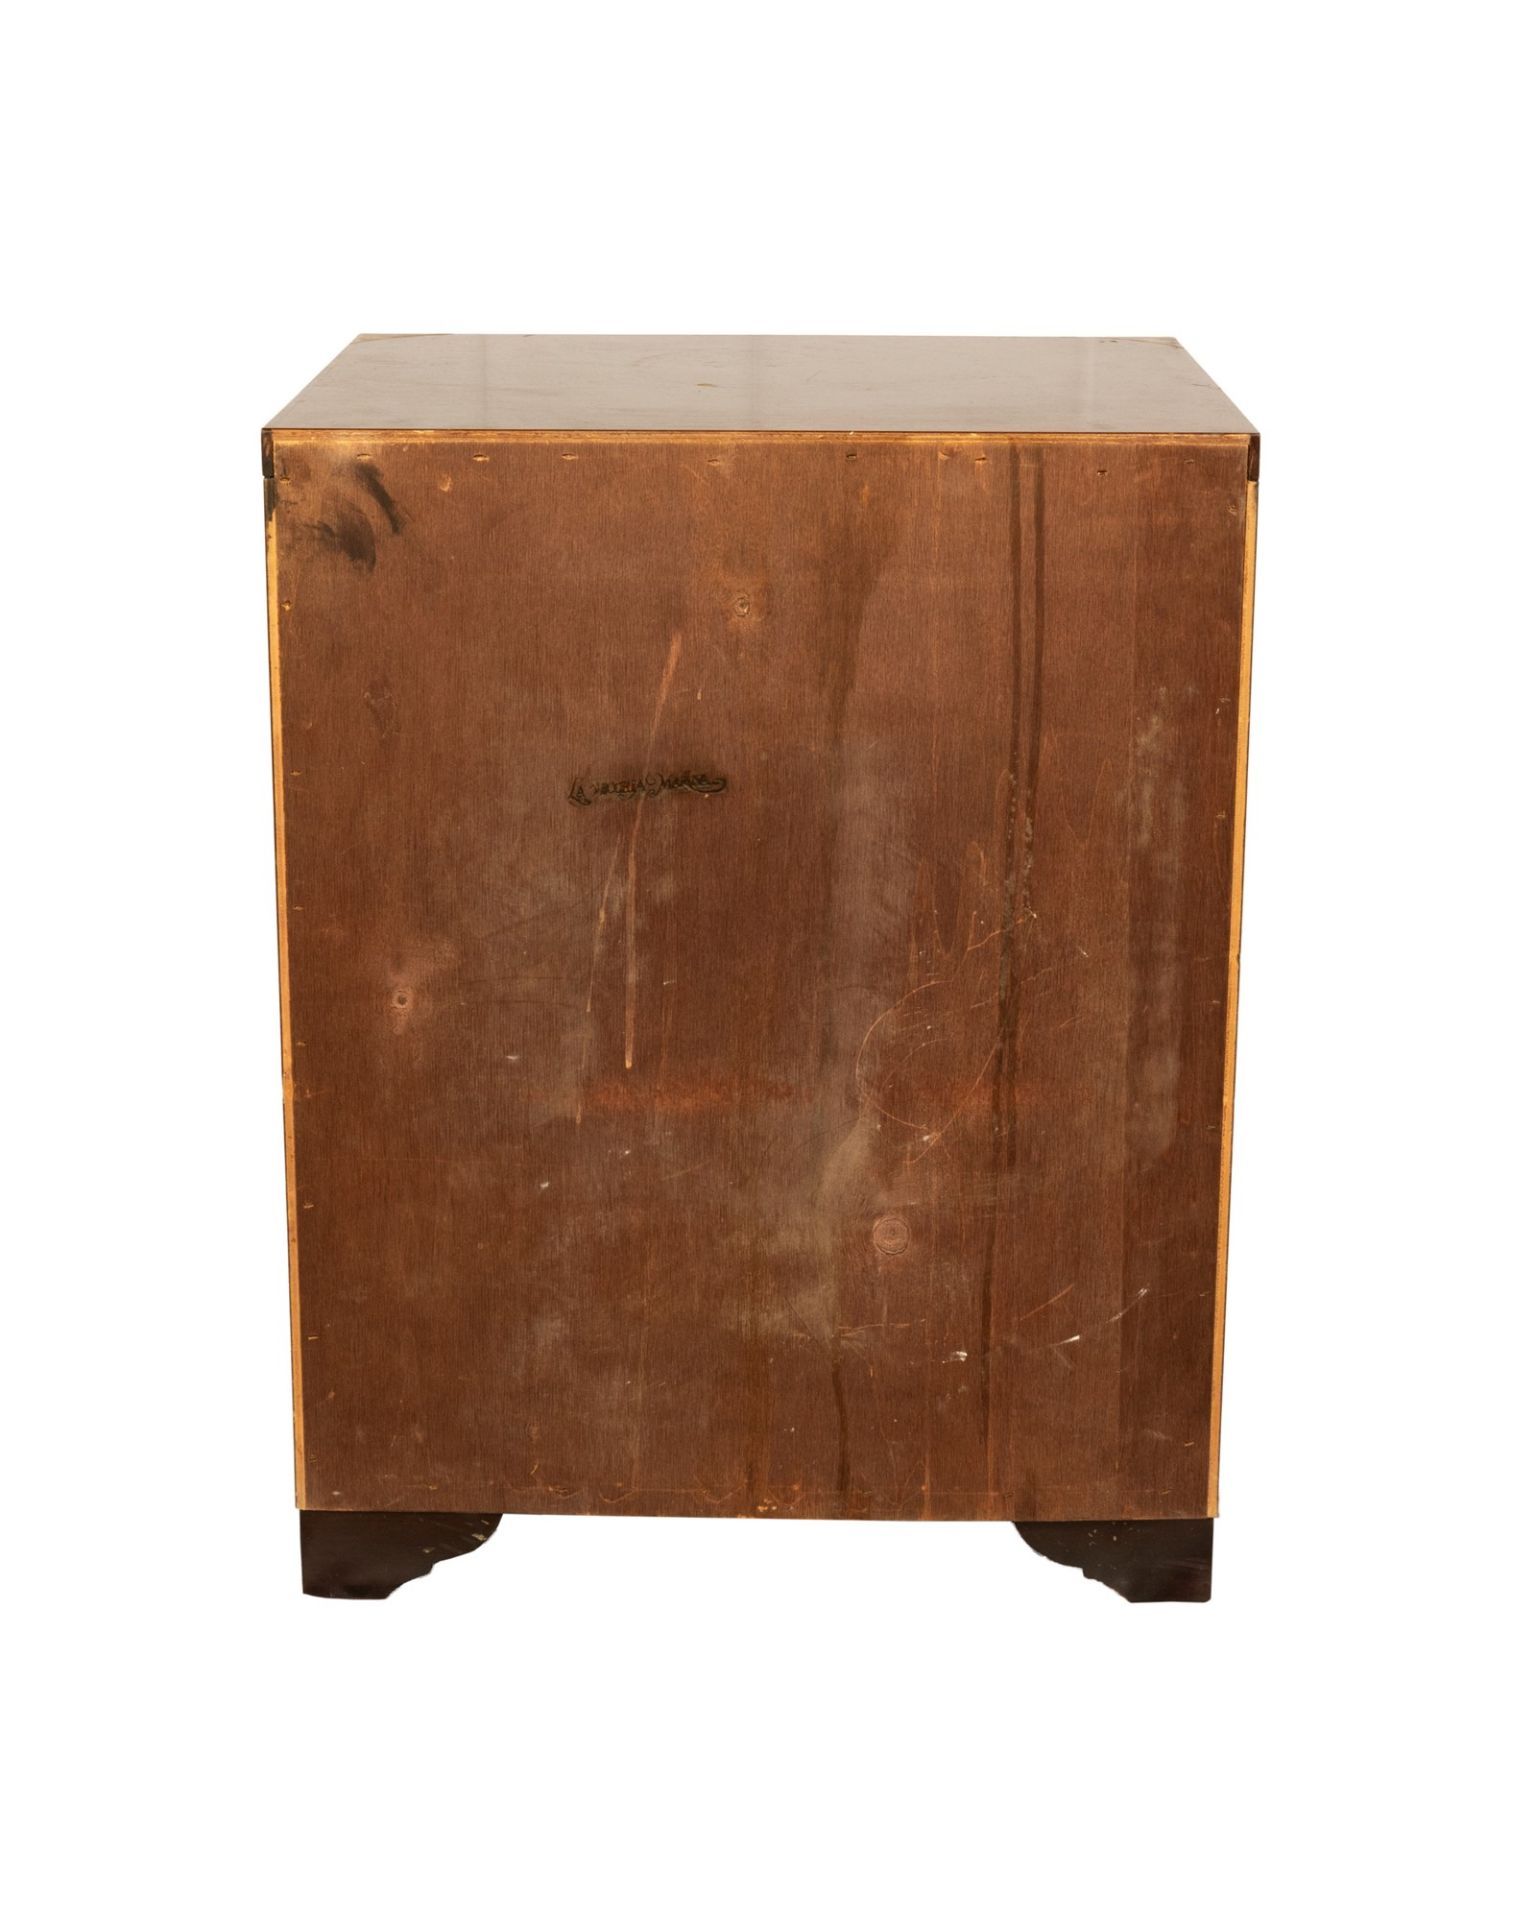 Antica Marina wooden bedside table with brass inserts - Image 23 of 23